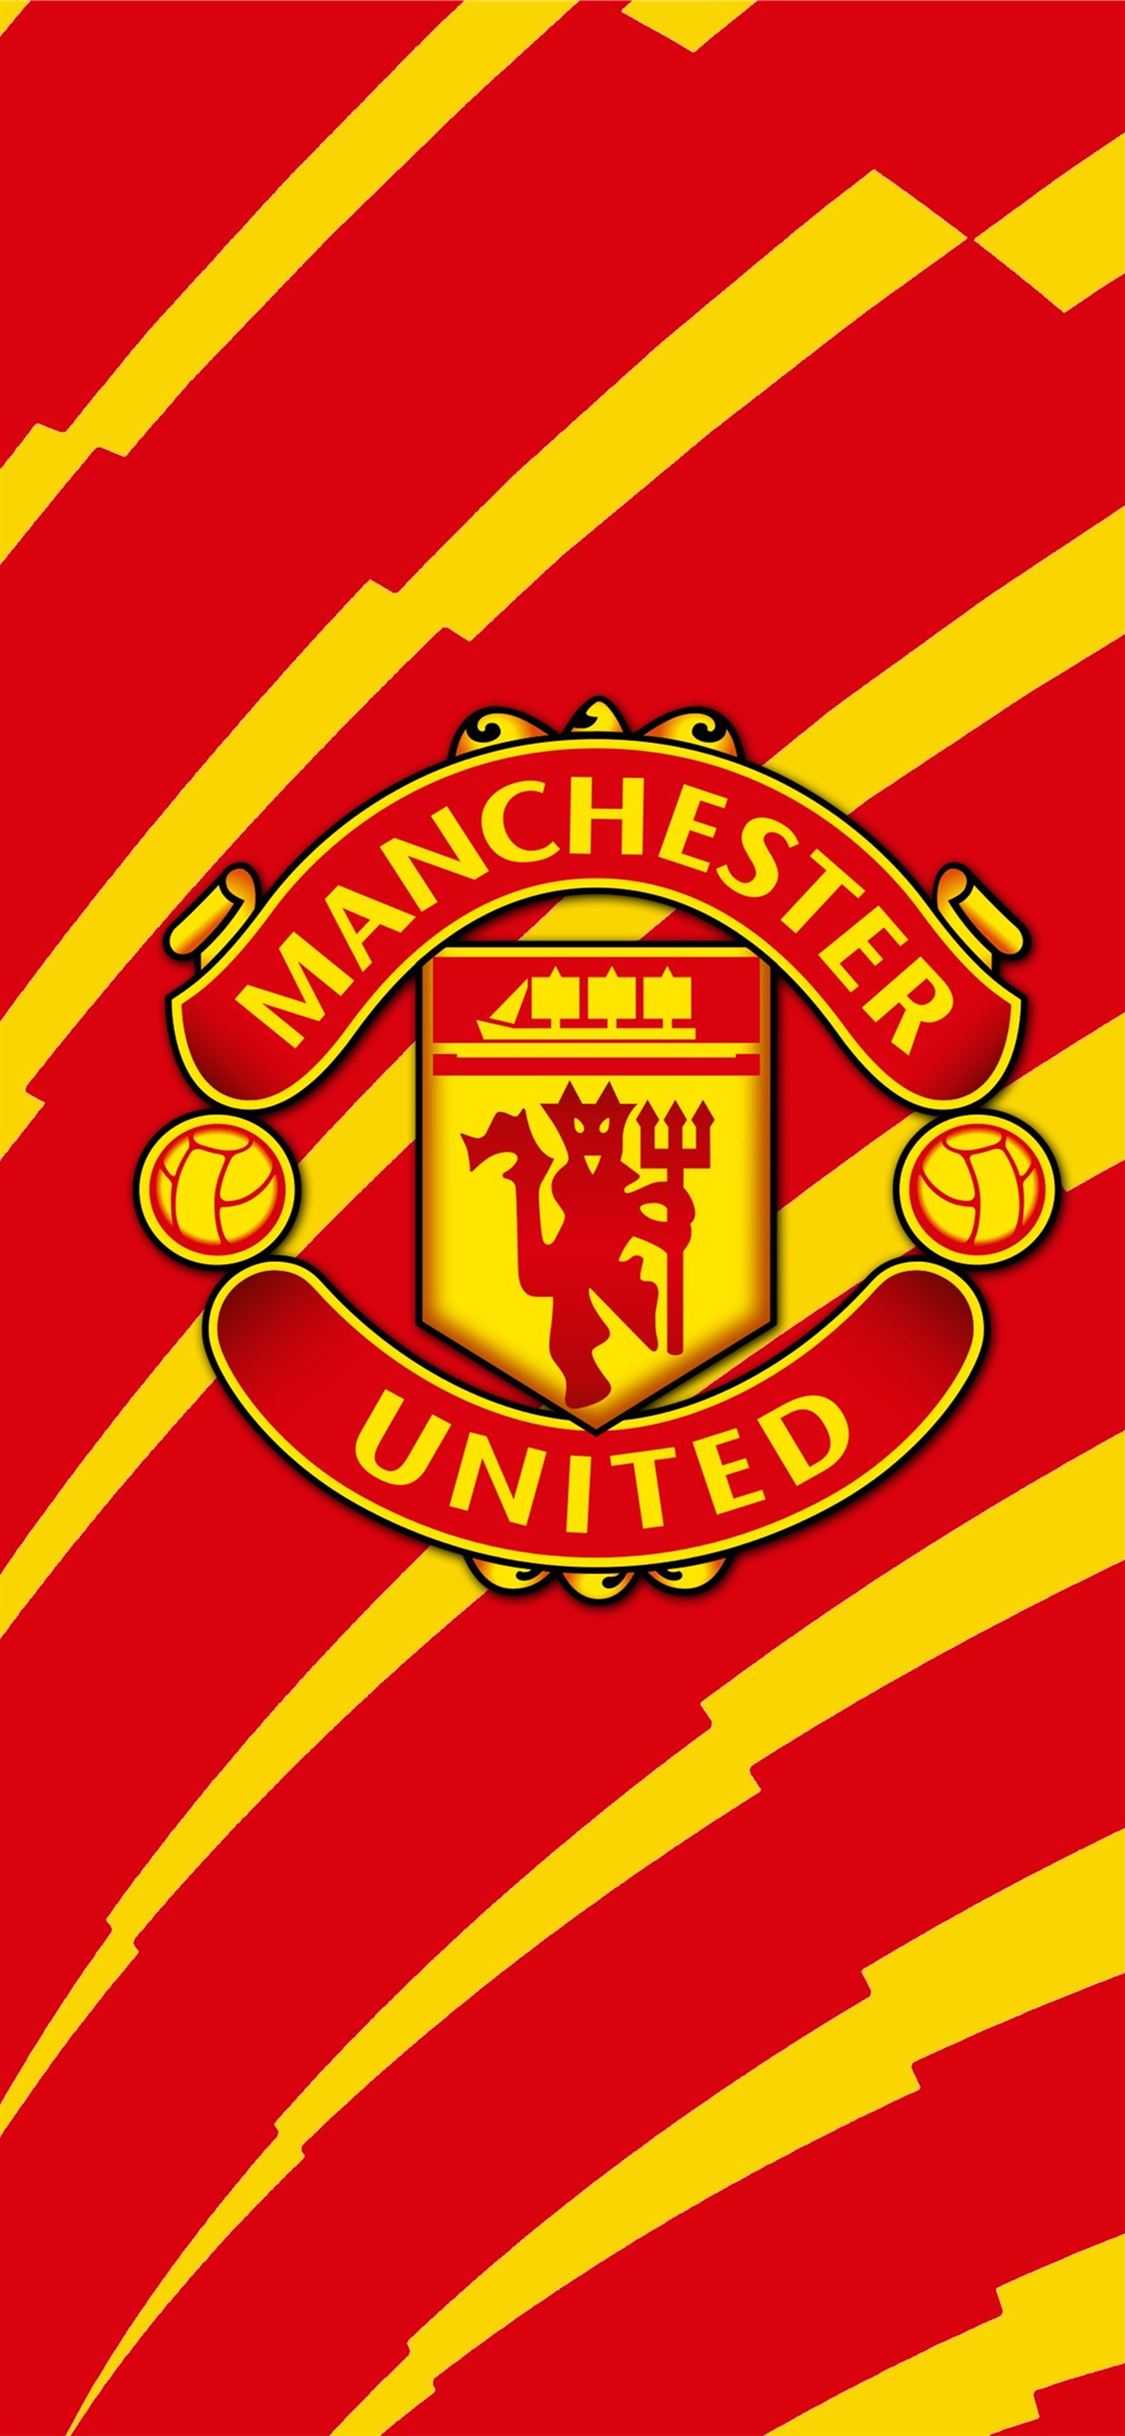 manchester united iphone wallpaper hd  Manchester united wallpaper Manchester  united Manchester united soccer